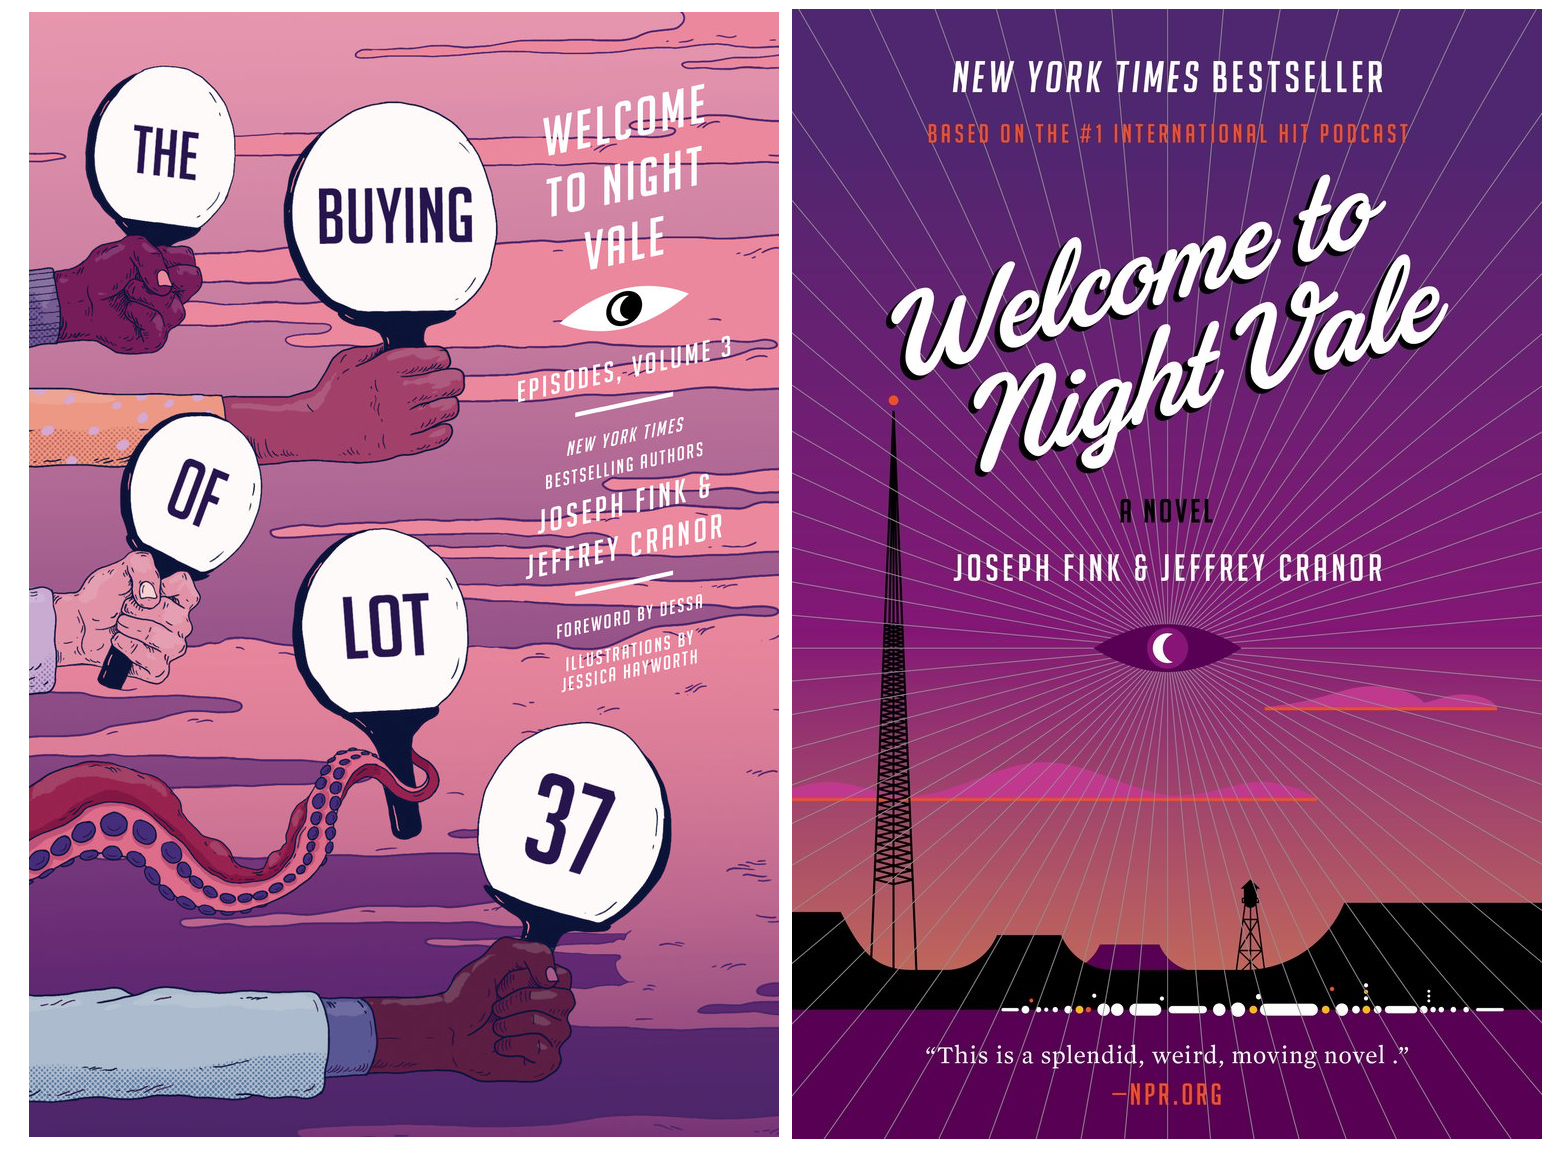 The front covers for two Night Vale, "Welcome to Night Vale: A Novel" and the third volume of episode collections "The Buying of Lot 37". The novel art is the classic purple and dark pink with the eye in the sky, crescent moon as its pupil, in the very center, radiating thin white lines across the whole book like like. There is a tall signal tower in the foreground. The second book features a series of hands coming out from the left edge of the image each holding ping-pong paddles that have each word of the title in them. One of the hands is a tentacle. The background is again purple and pink, and it looks like clouds in the sky, or possibly a strange oil spill. 